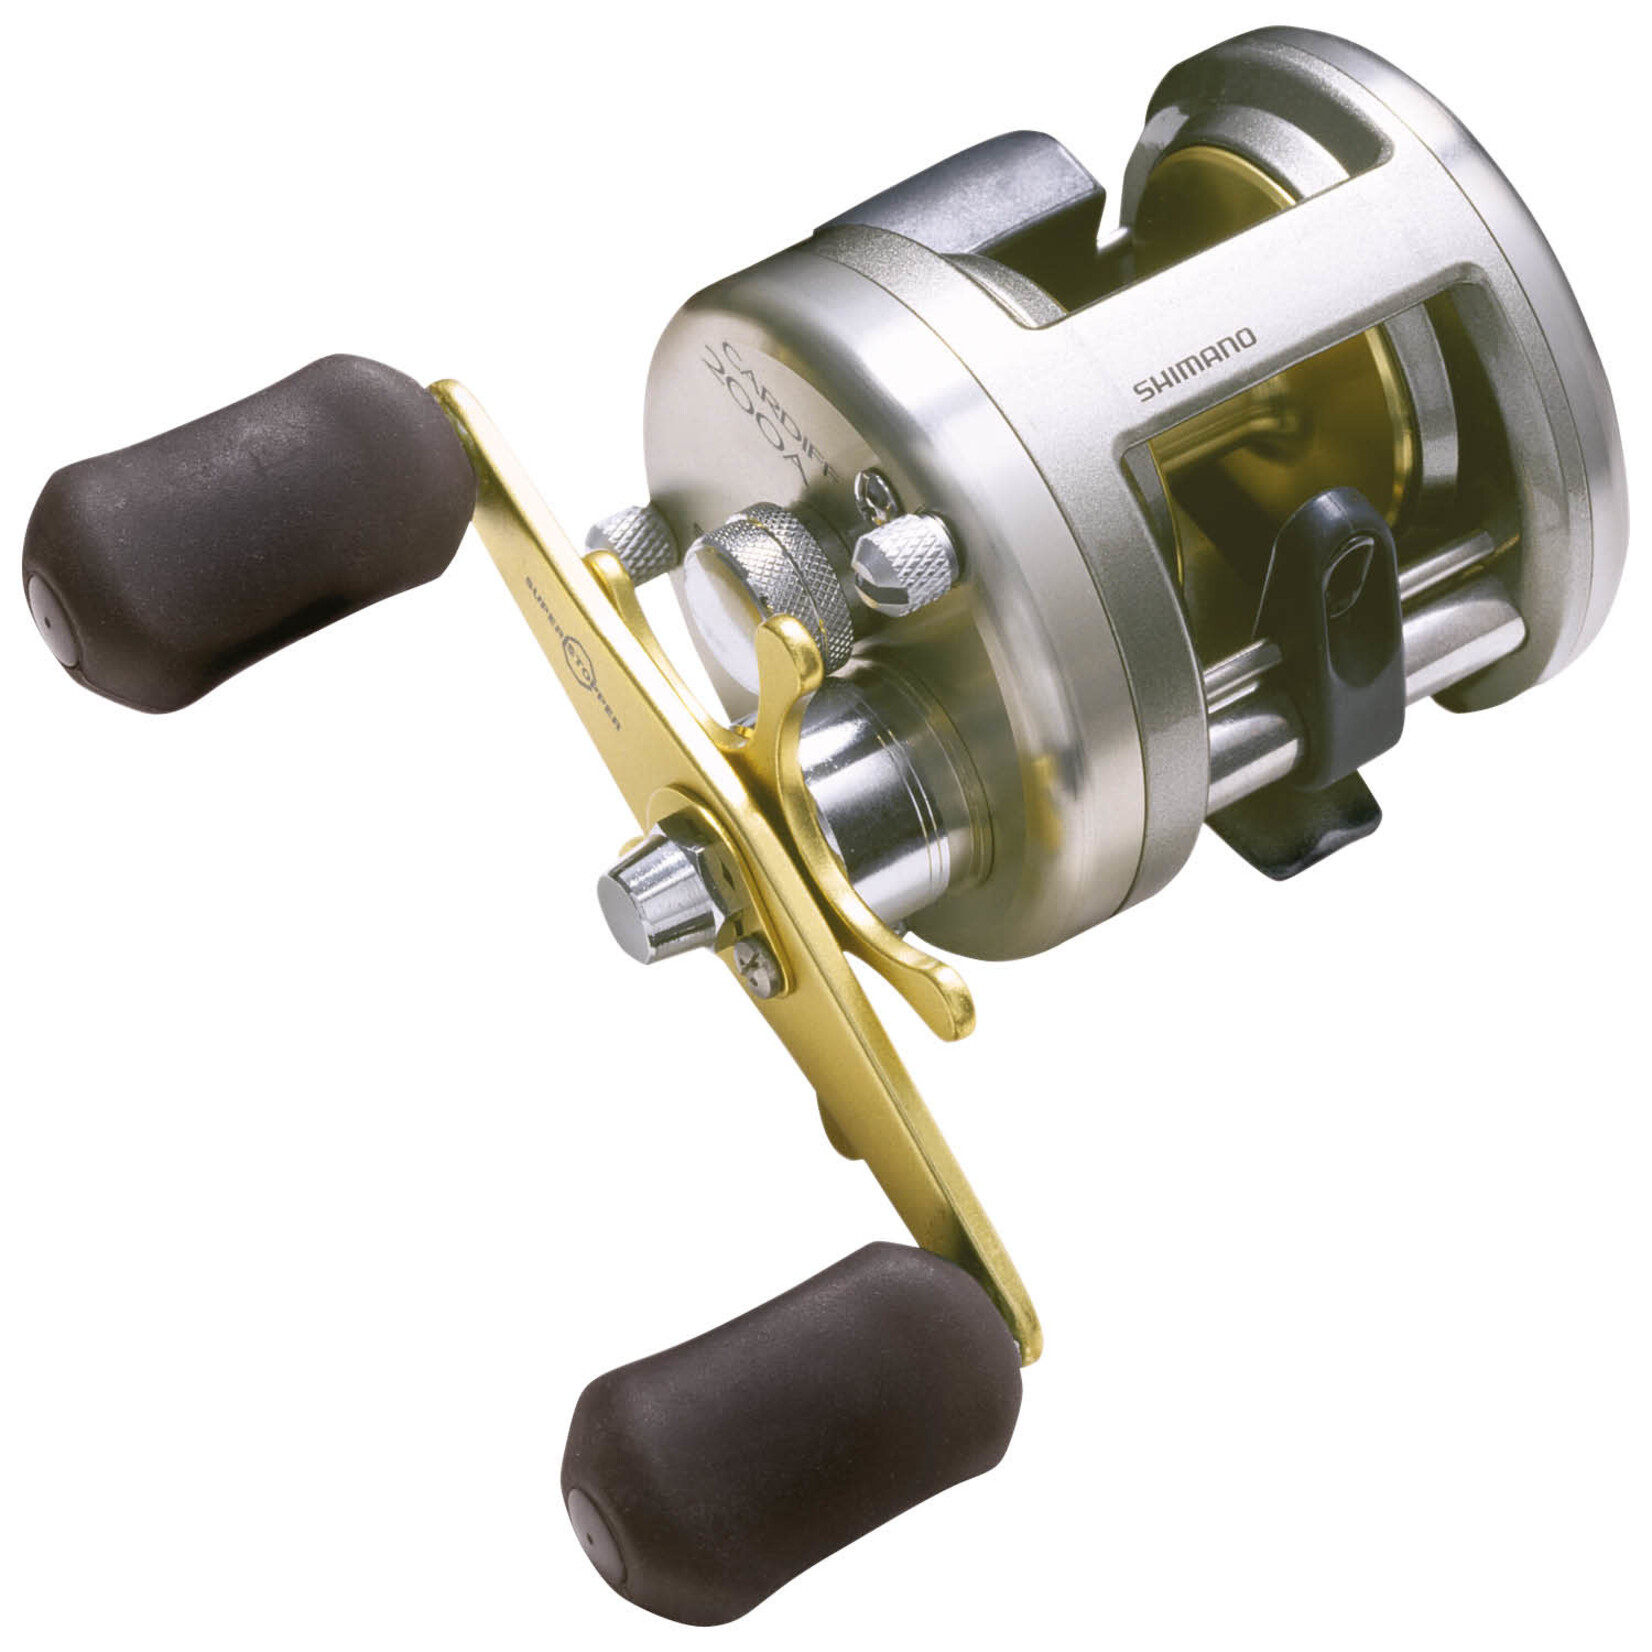 SHIMANO Moulinet Lancer Lourd Shimano Cardiff 400A Droitier